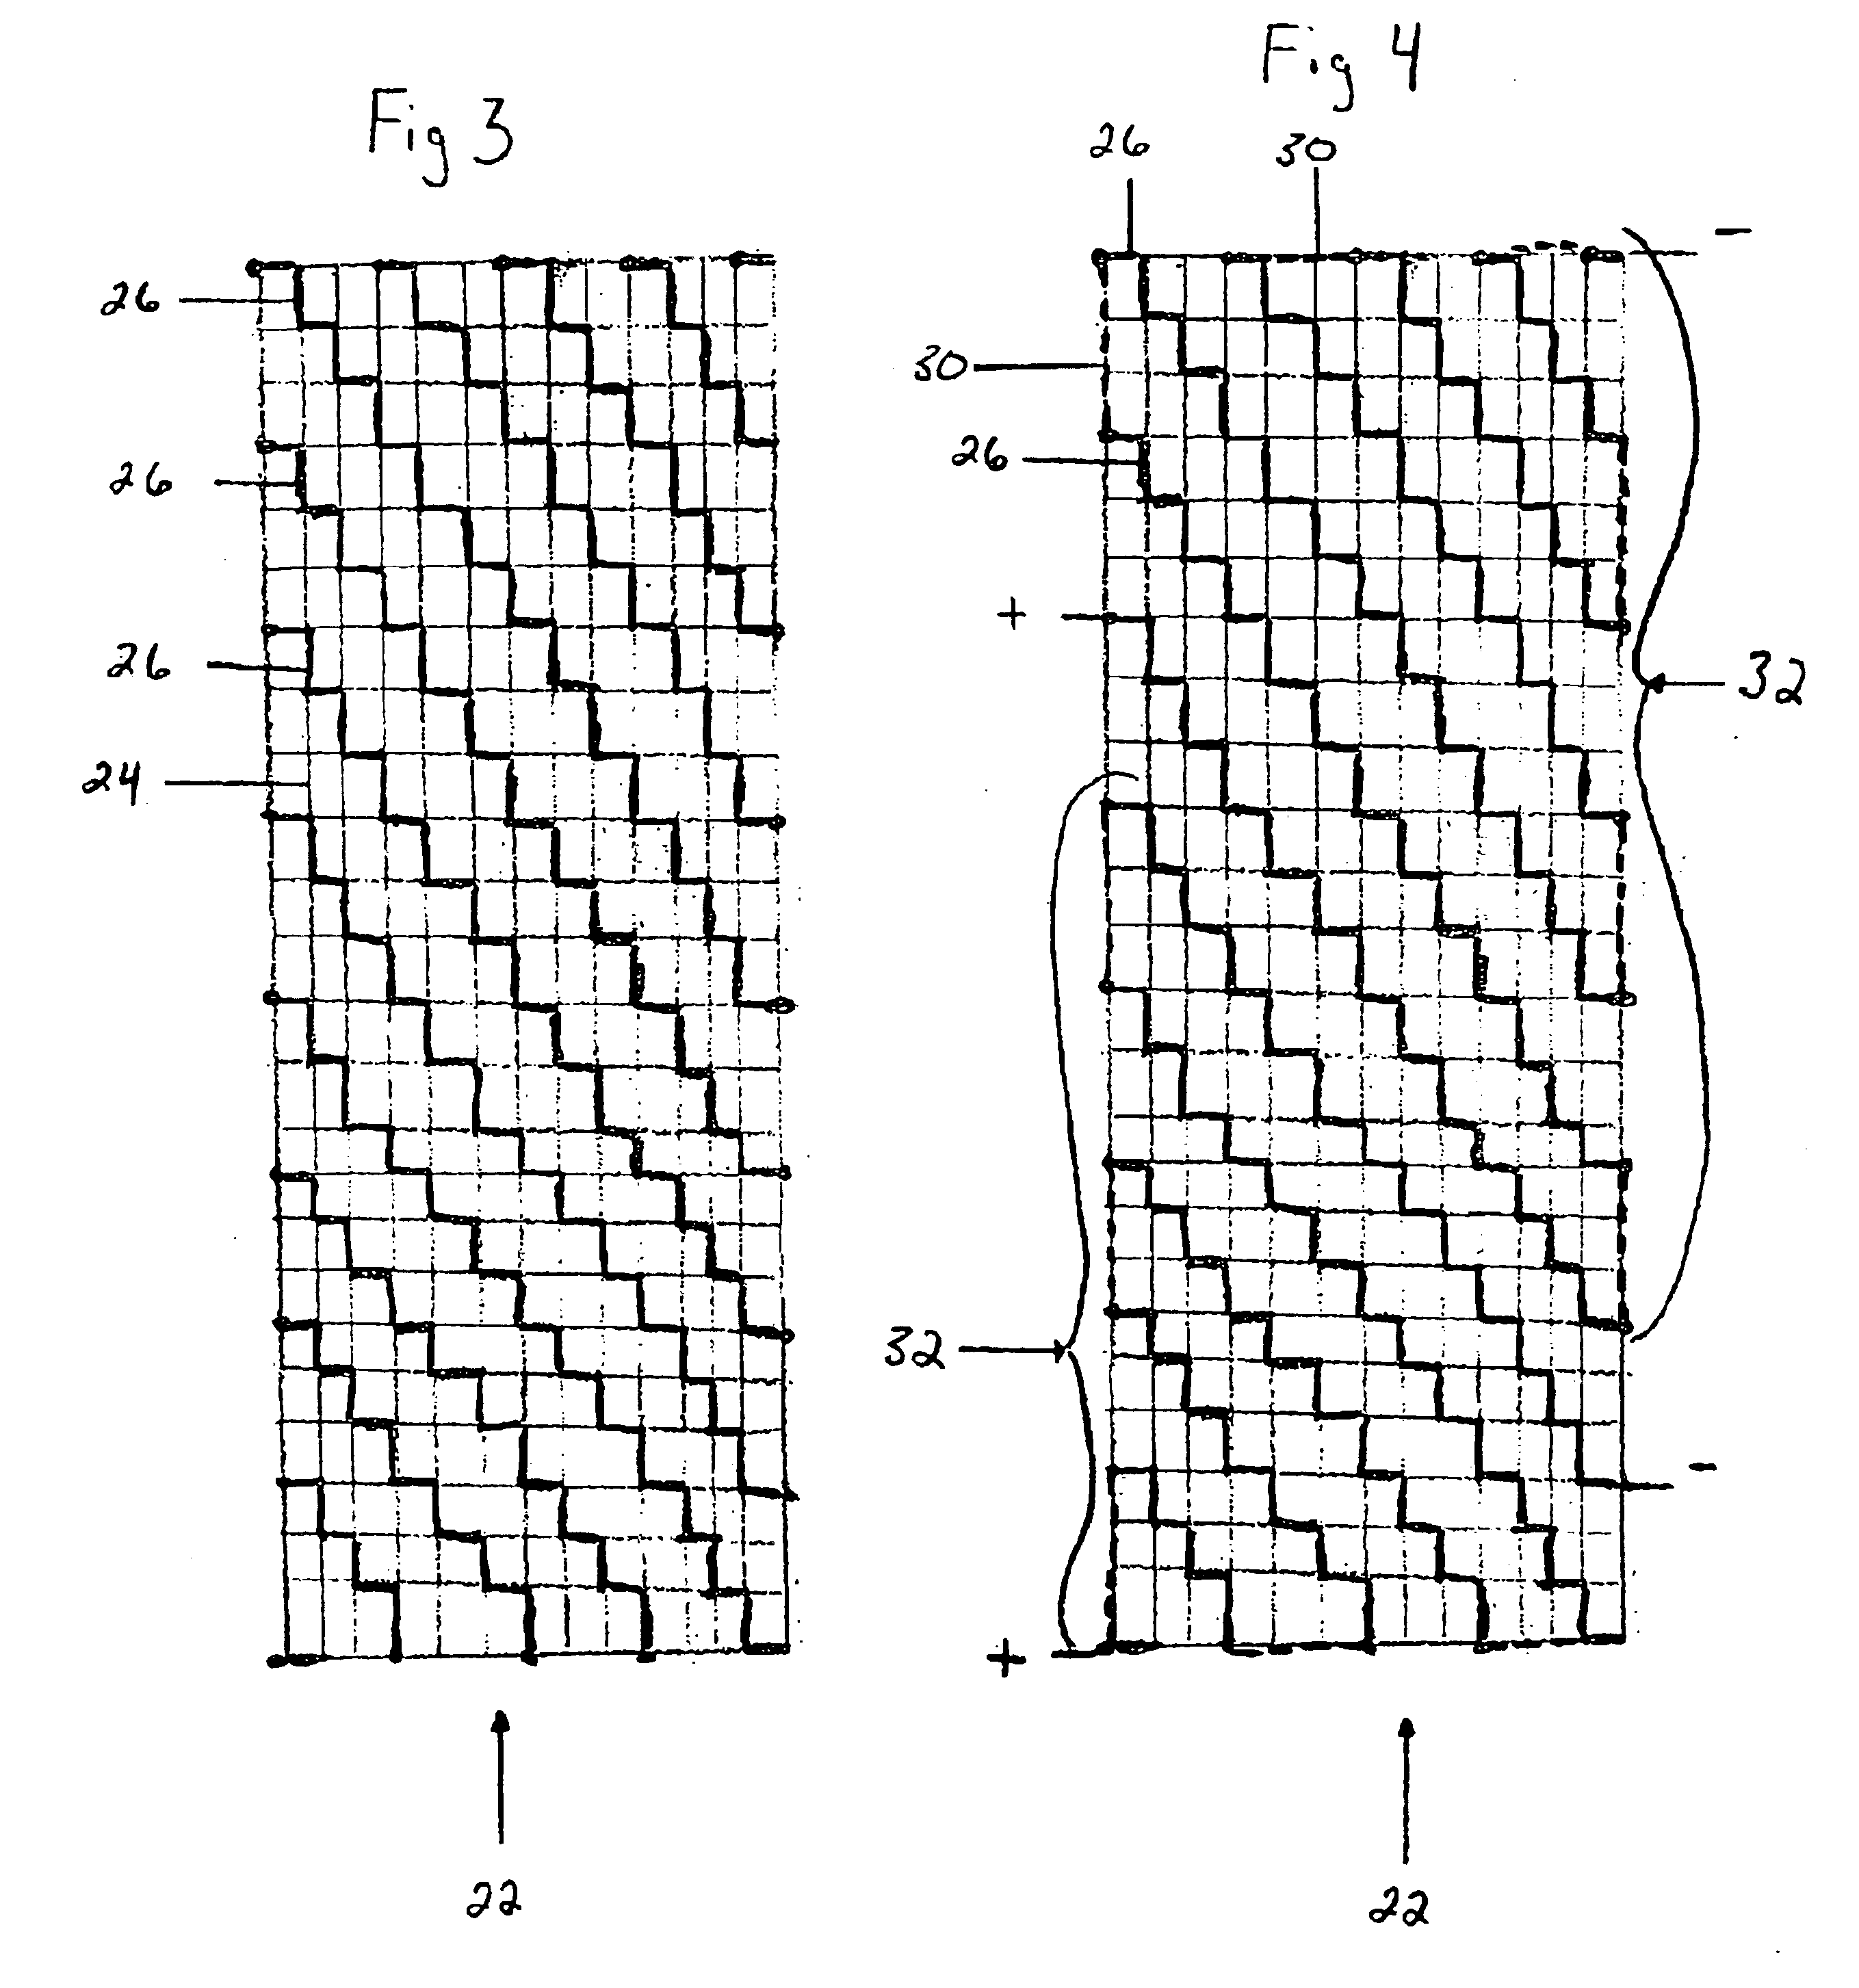 Electronically monitored fish farm net and method